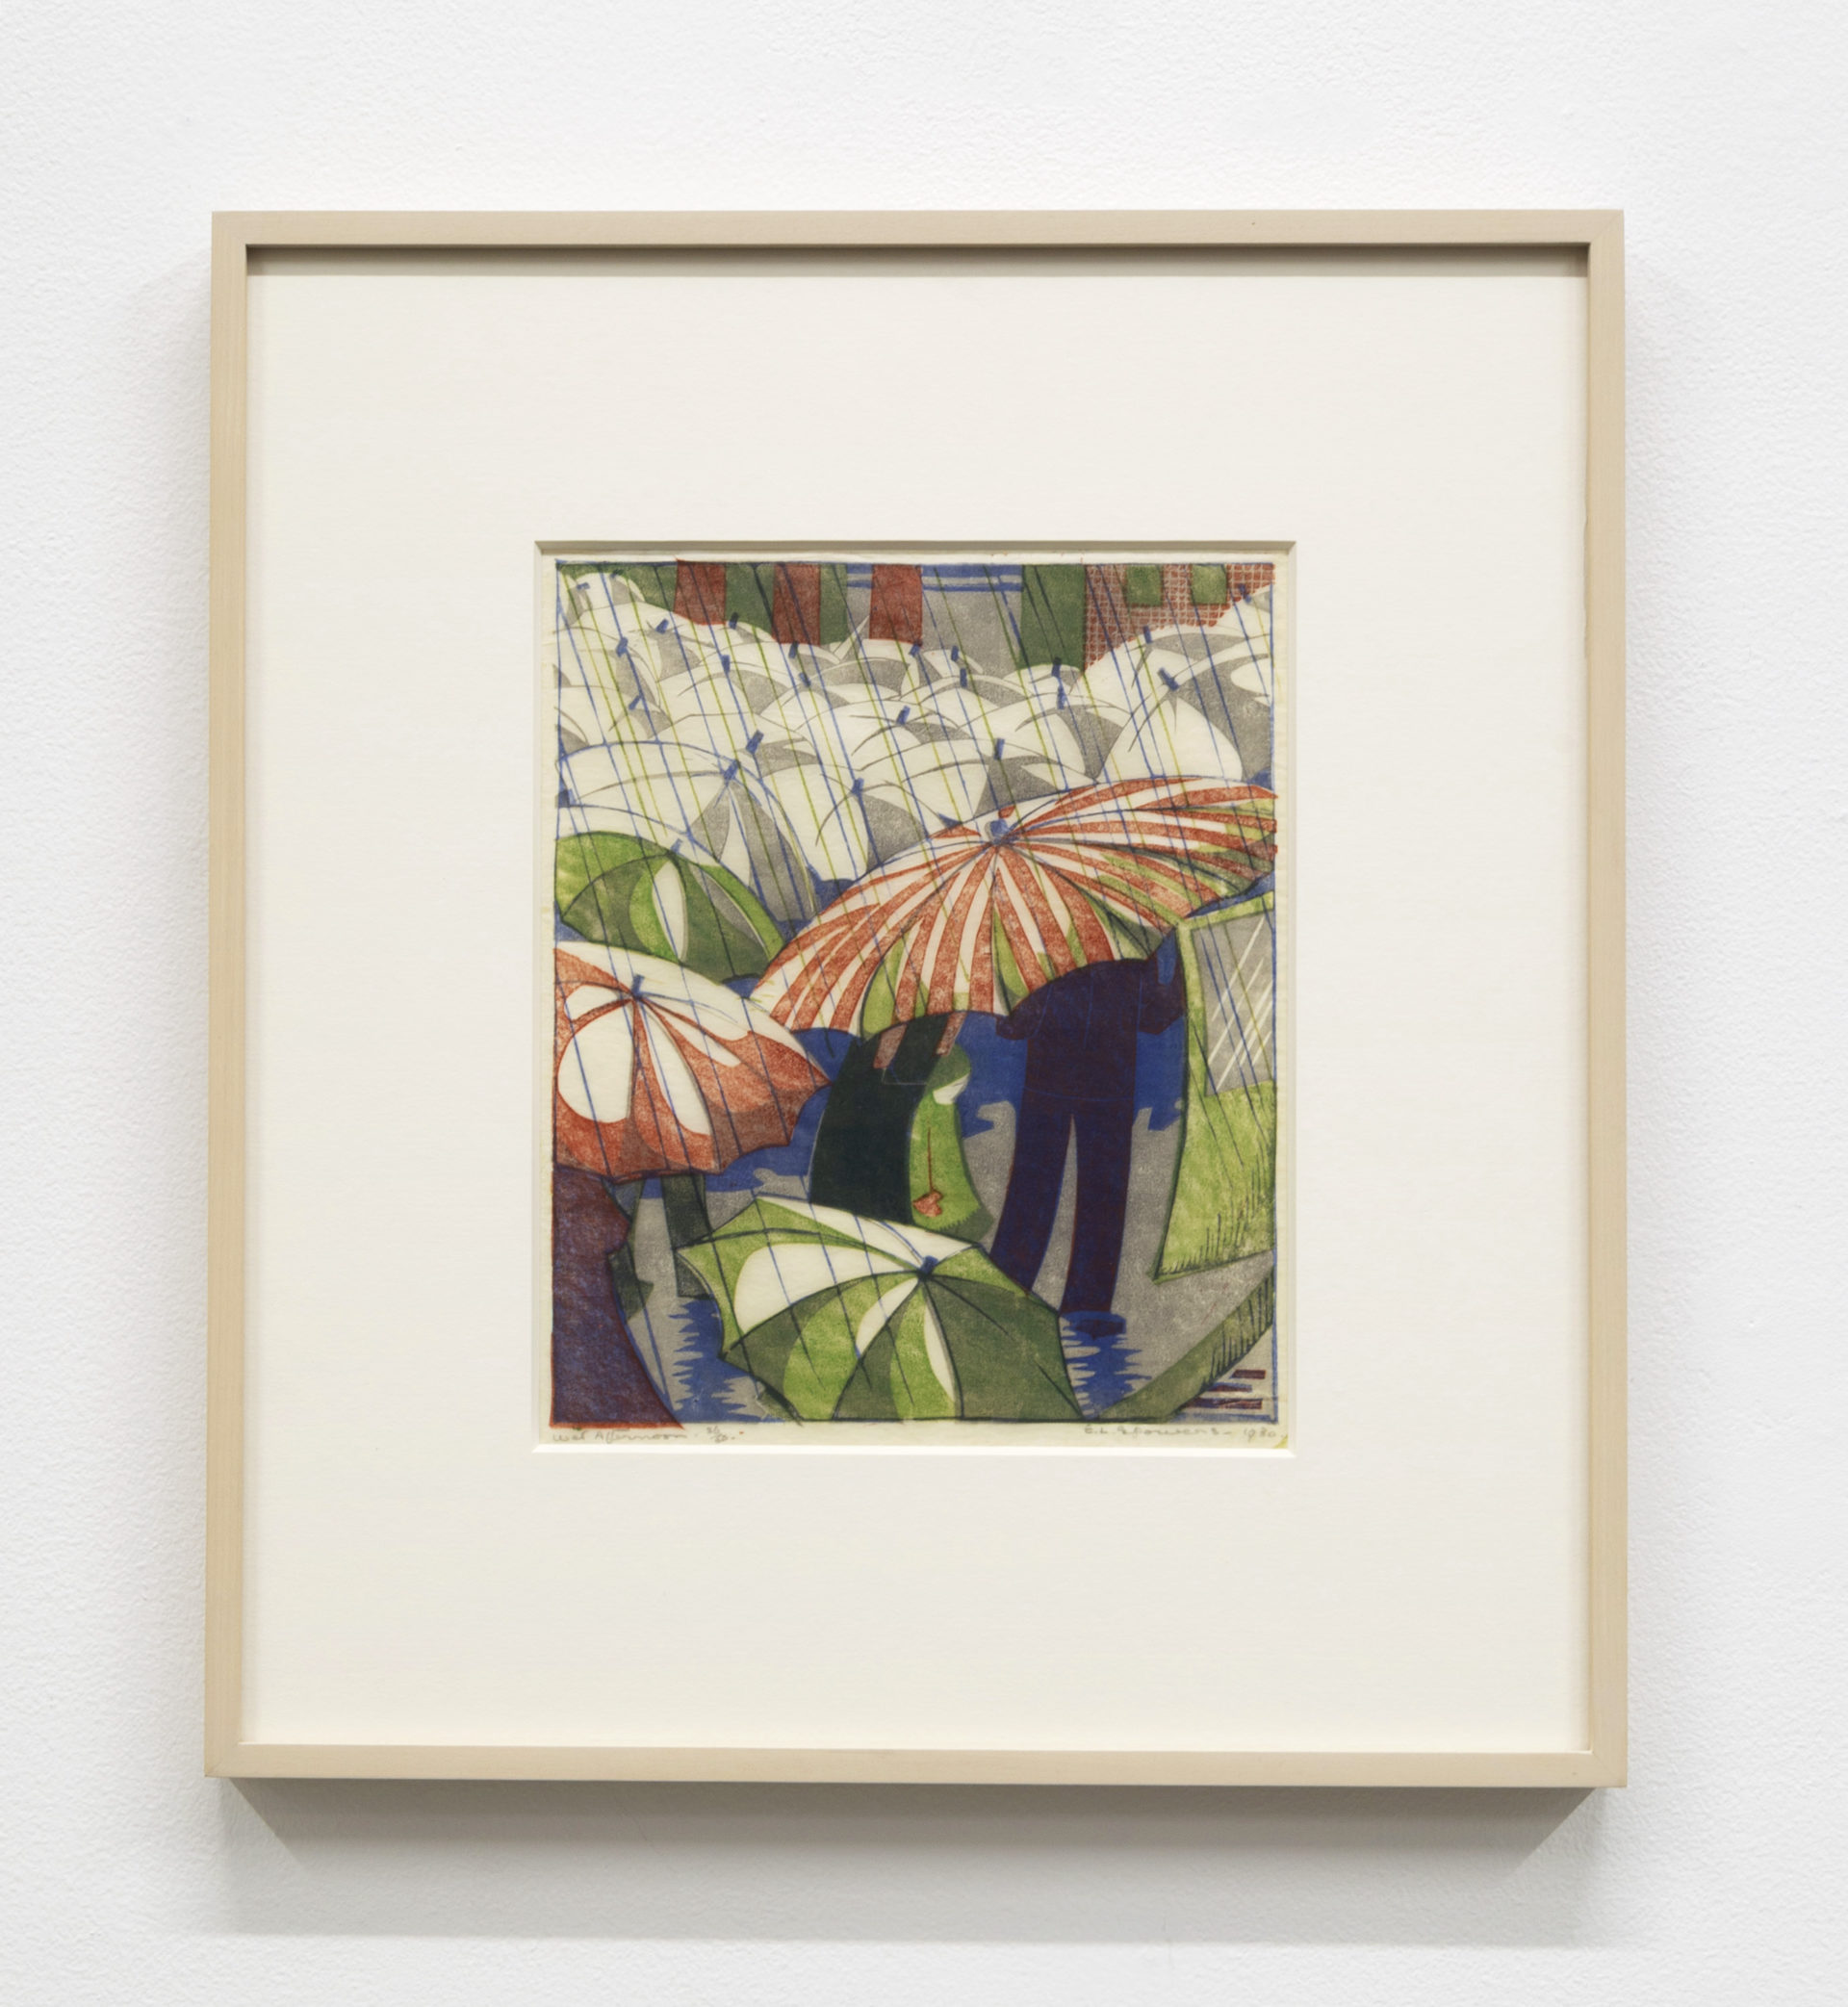 Ethel Spowers Wet Afternoon, 1930 Linocut Image Dimensions: 9 9/16 x 8 inches (24.3 x 20.3 cm) Paper Dimensions: 11 5/16 x 9 1/8 inches (28.7 x 23.2 cm) Edition of 50